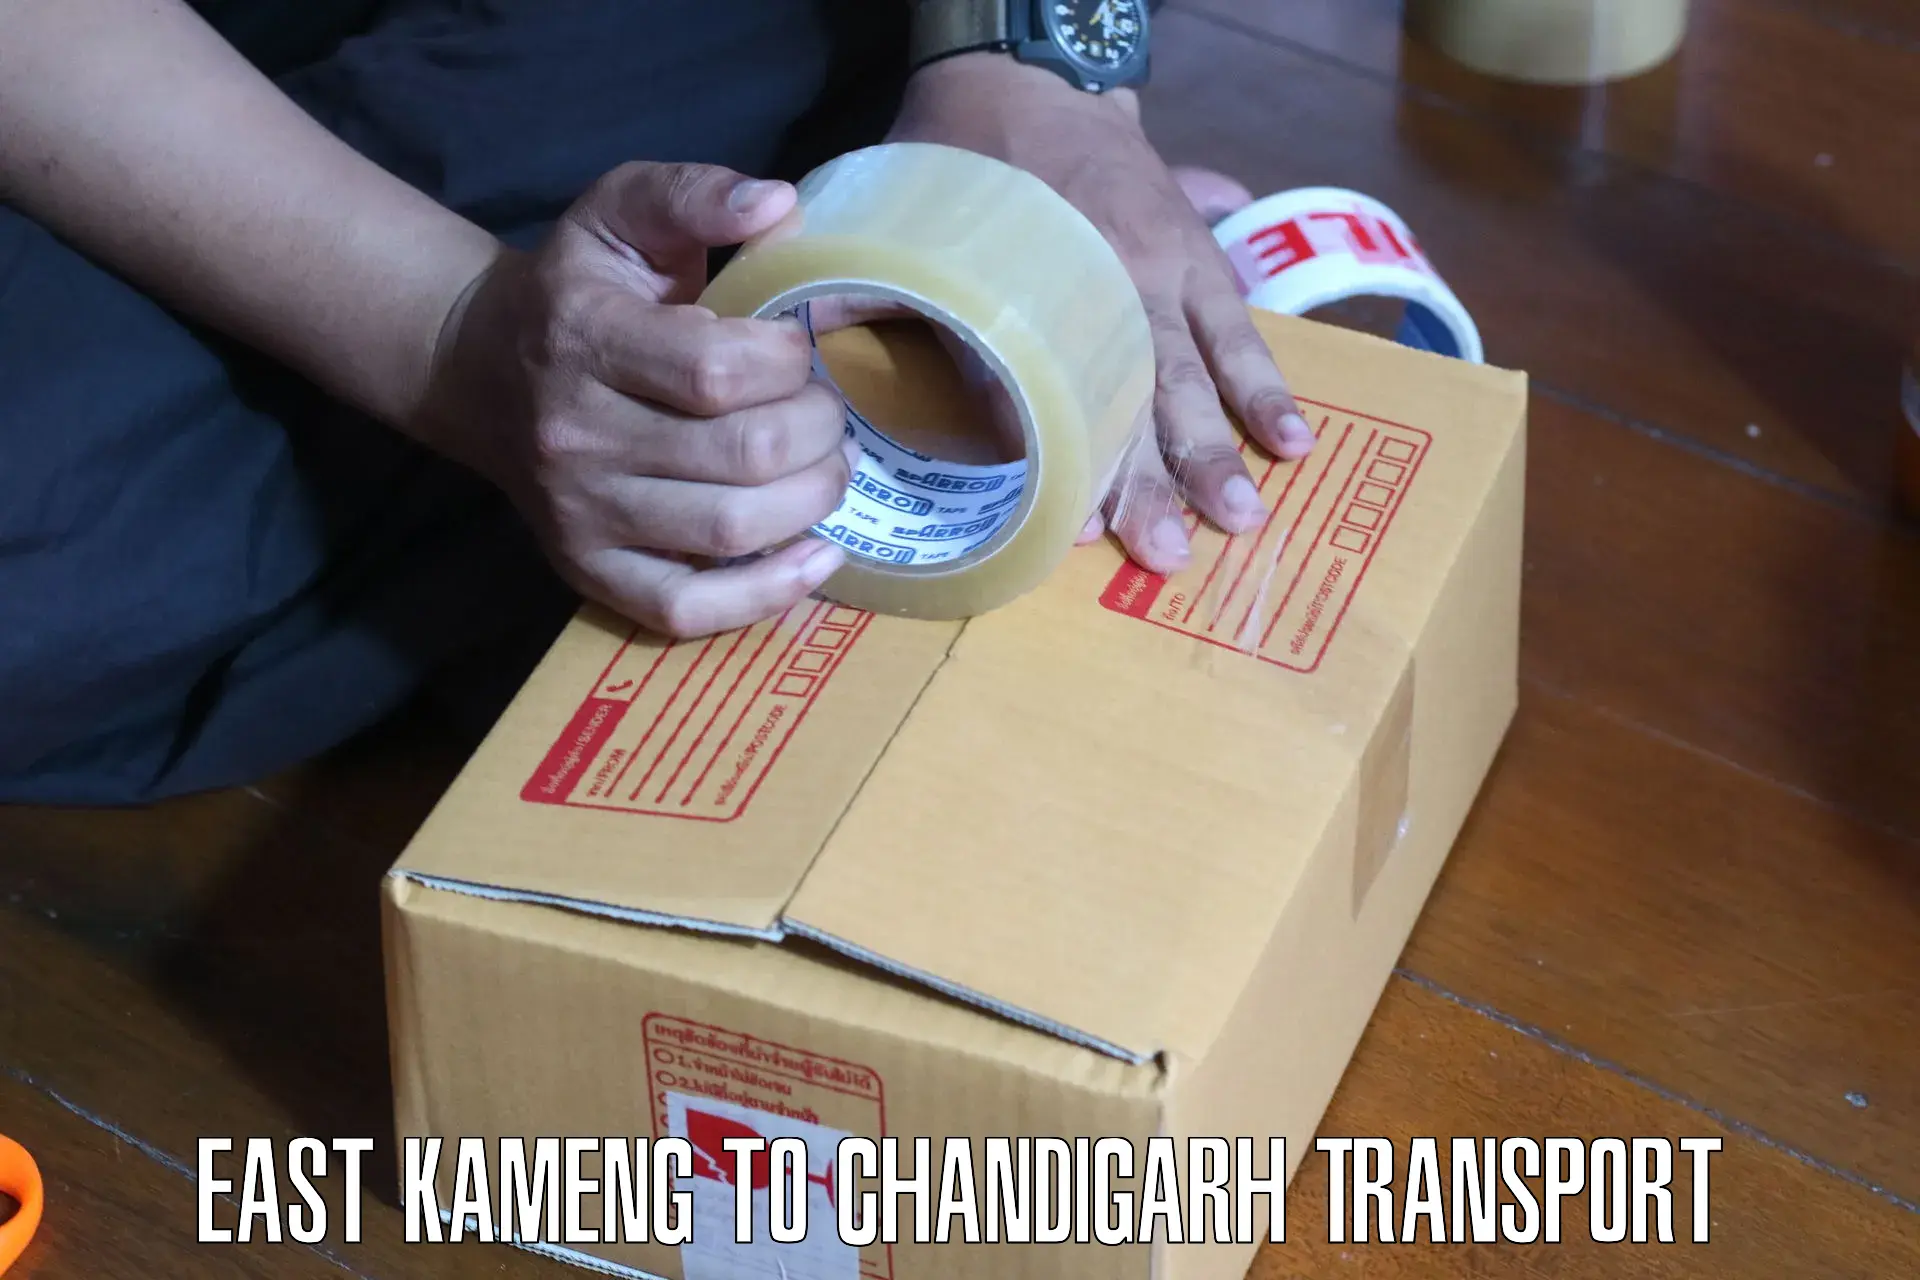 Commercial transport service East Kameng to Chandigarh